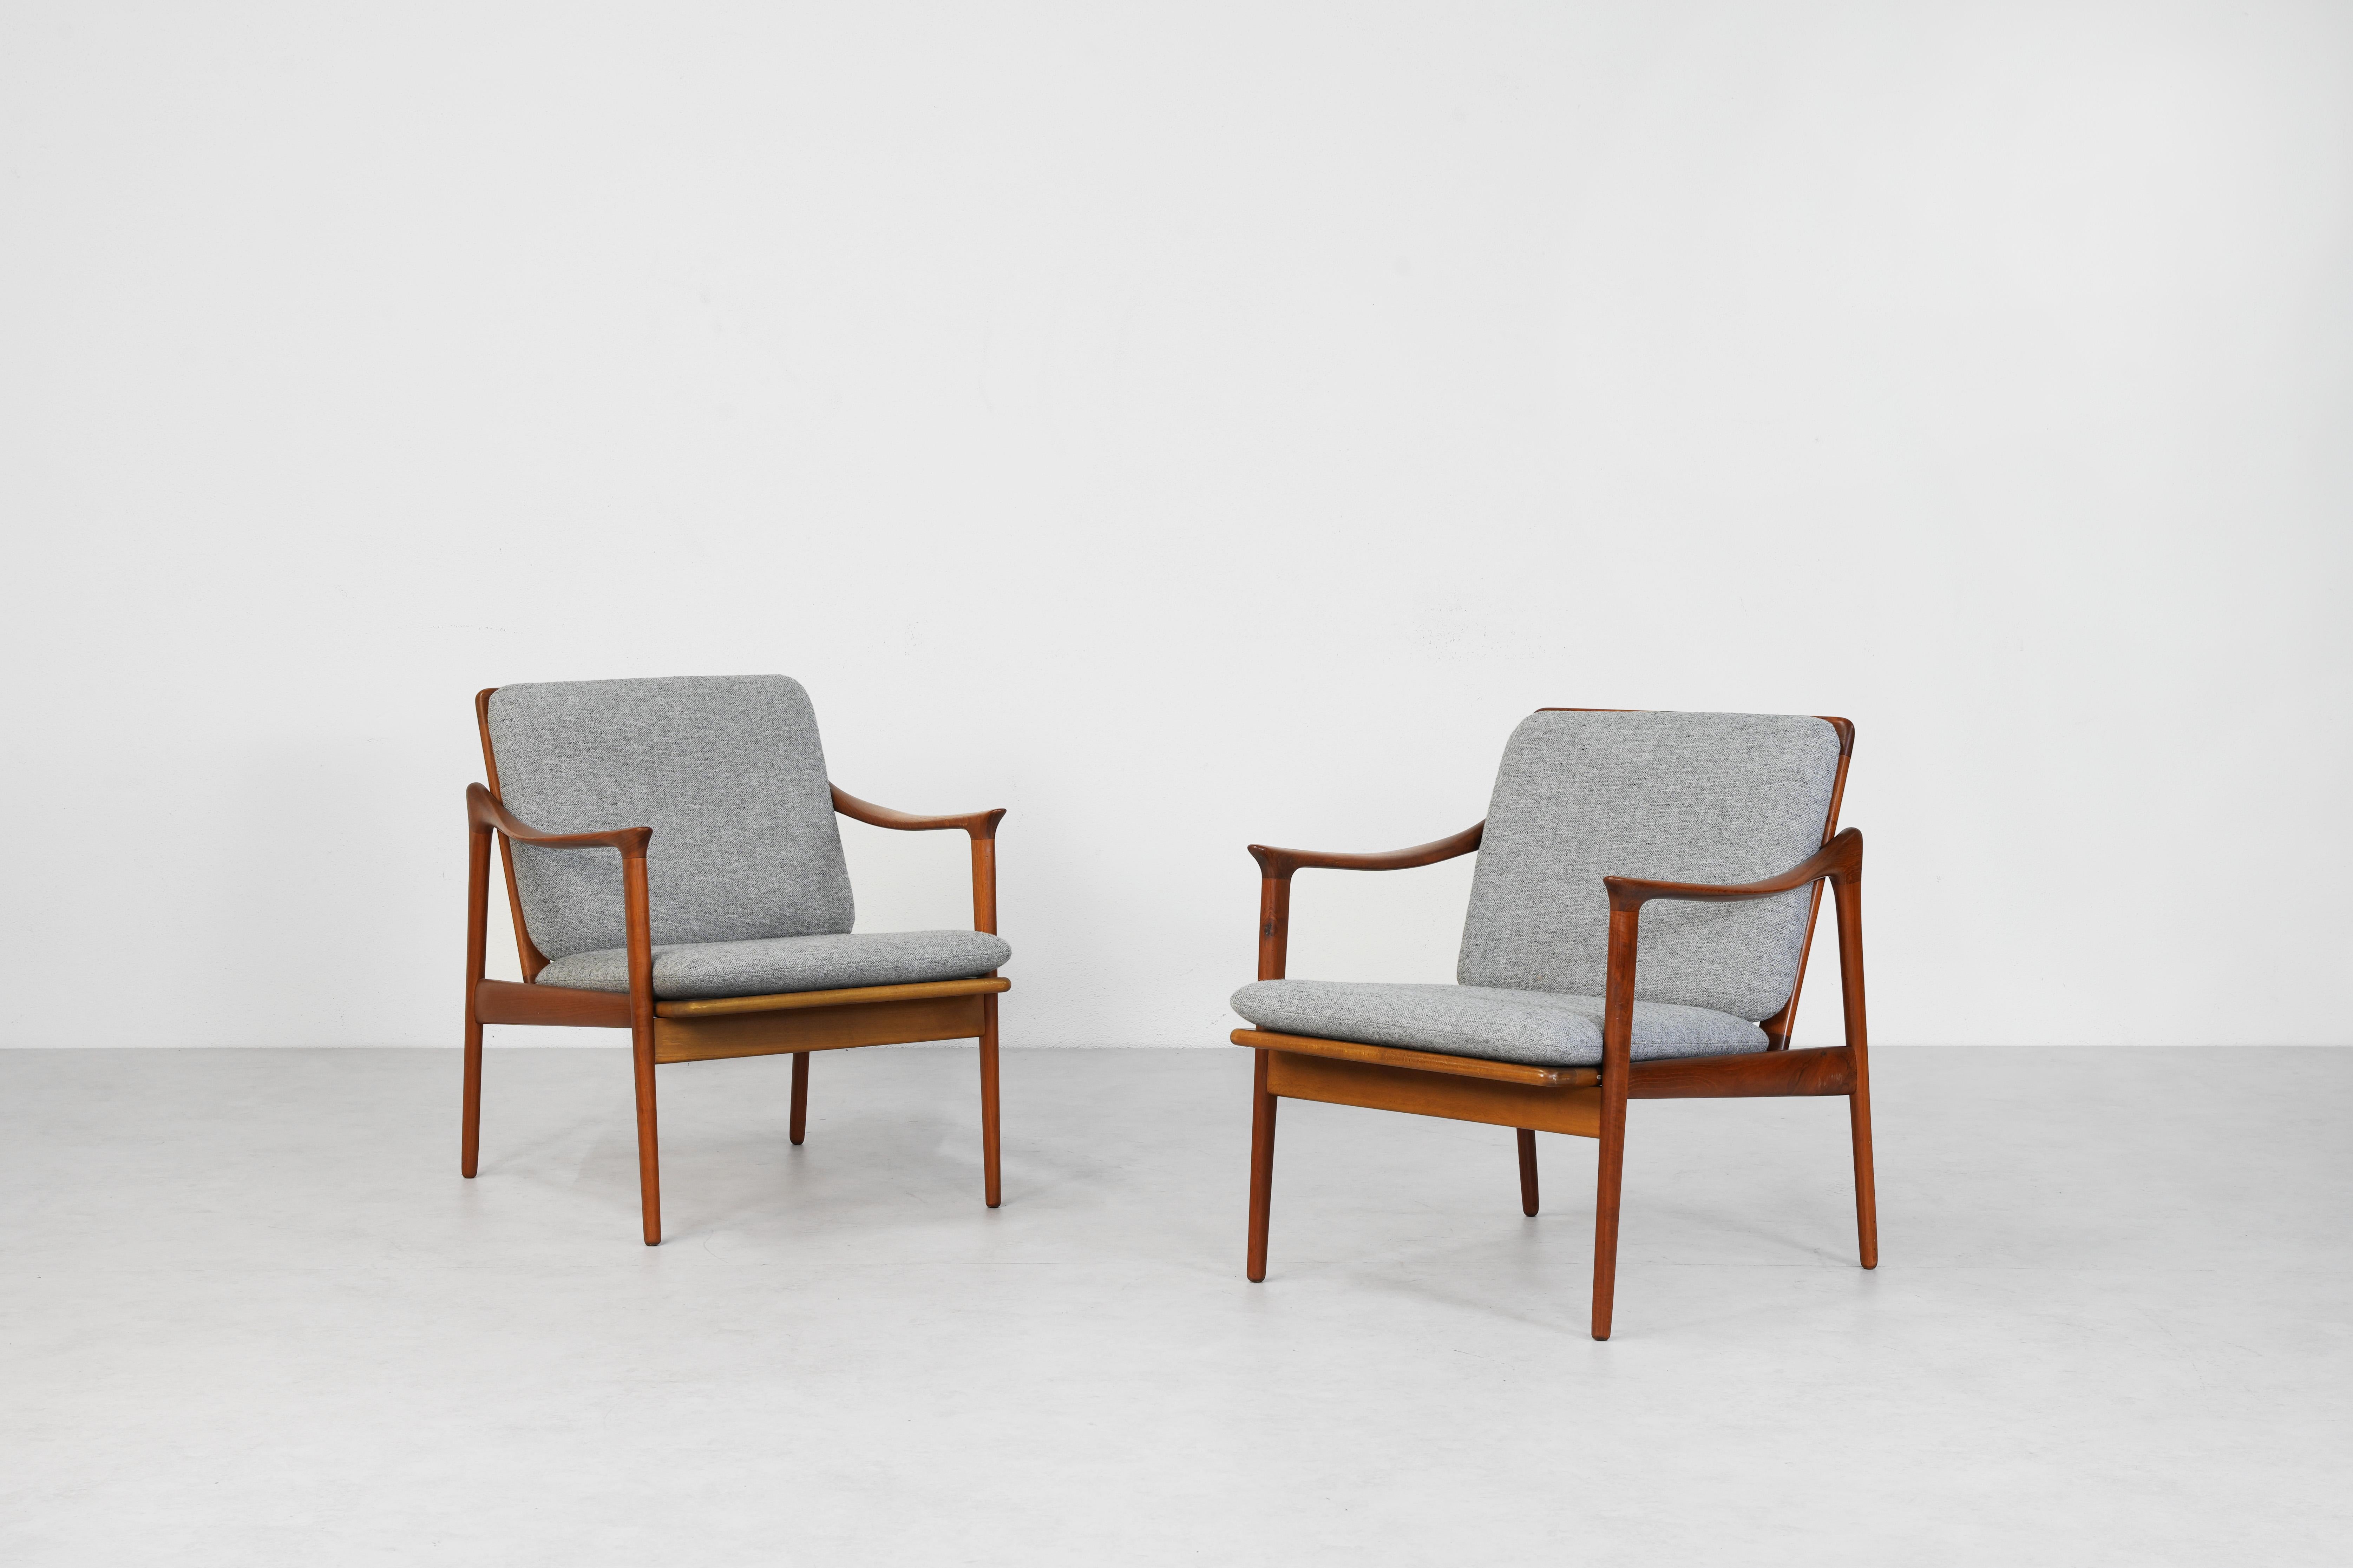 Beautiful pair of lounge and easy chairs designed by Fredrik A. Kayser and manufactured by Vatne Møbler in the 1960s in Norway. Both chairs feature a teakwood frame with extraordinary swung armrests and are in excellent condition.